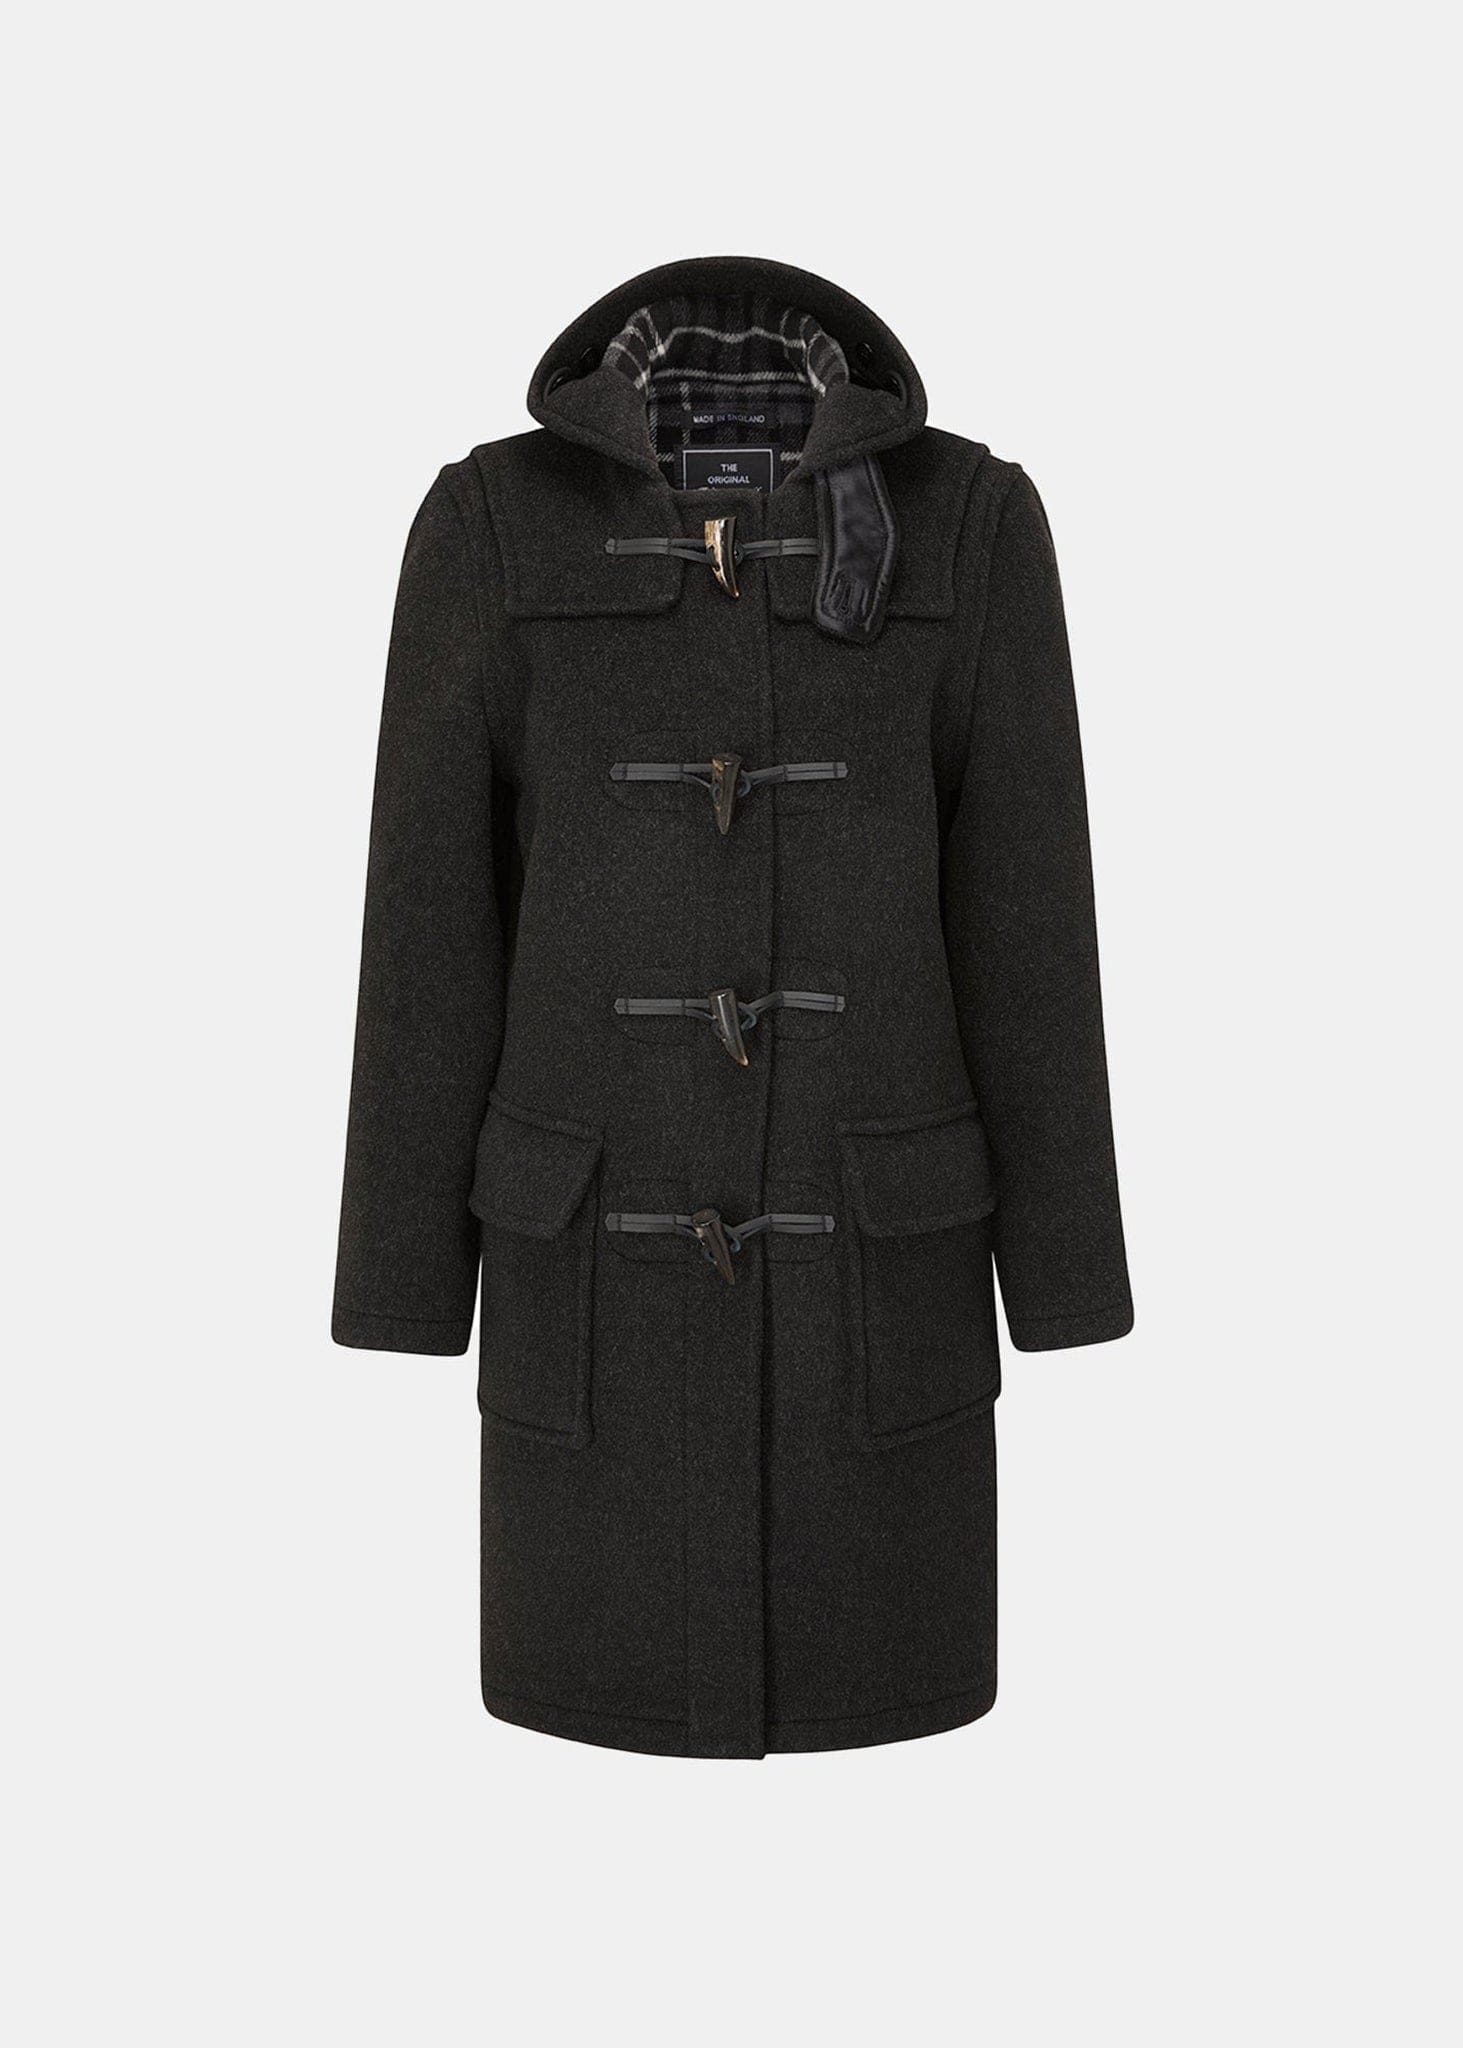 ORIGINAL DUFFLE COAT CHARCOAL JAPAN COLLECTION – Gloverall